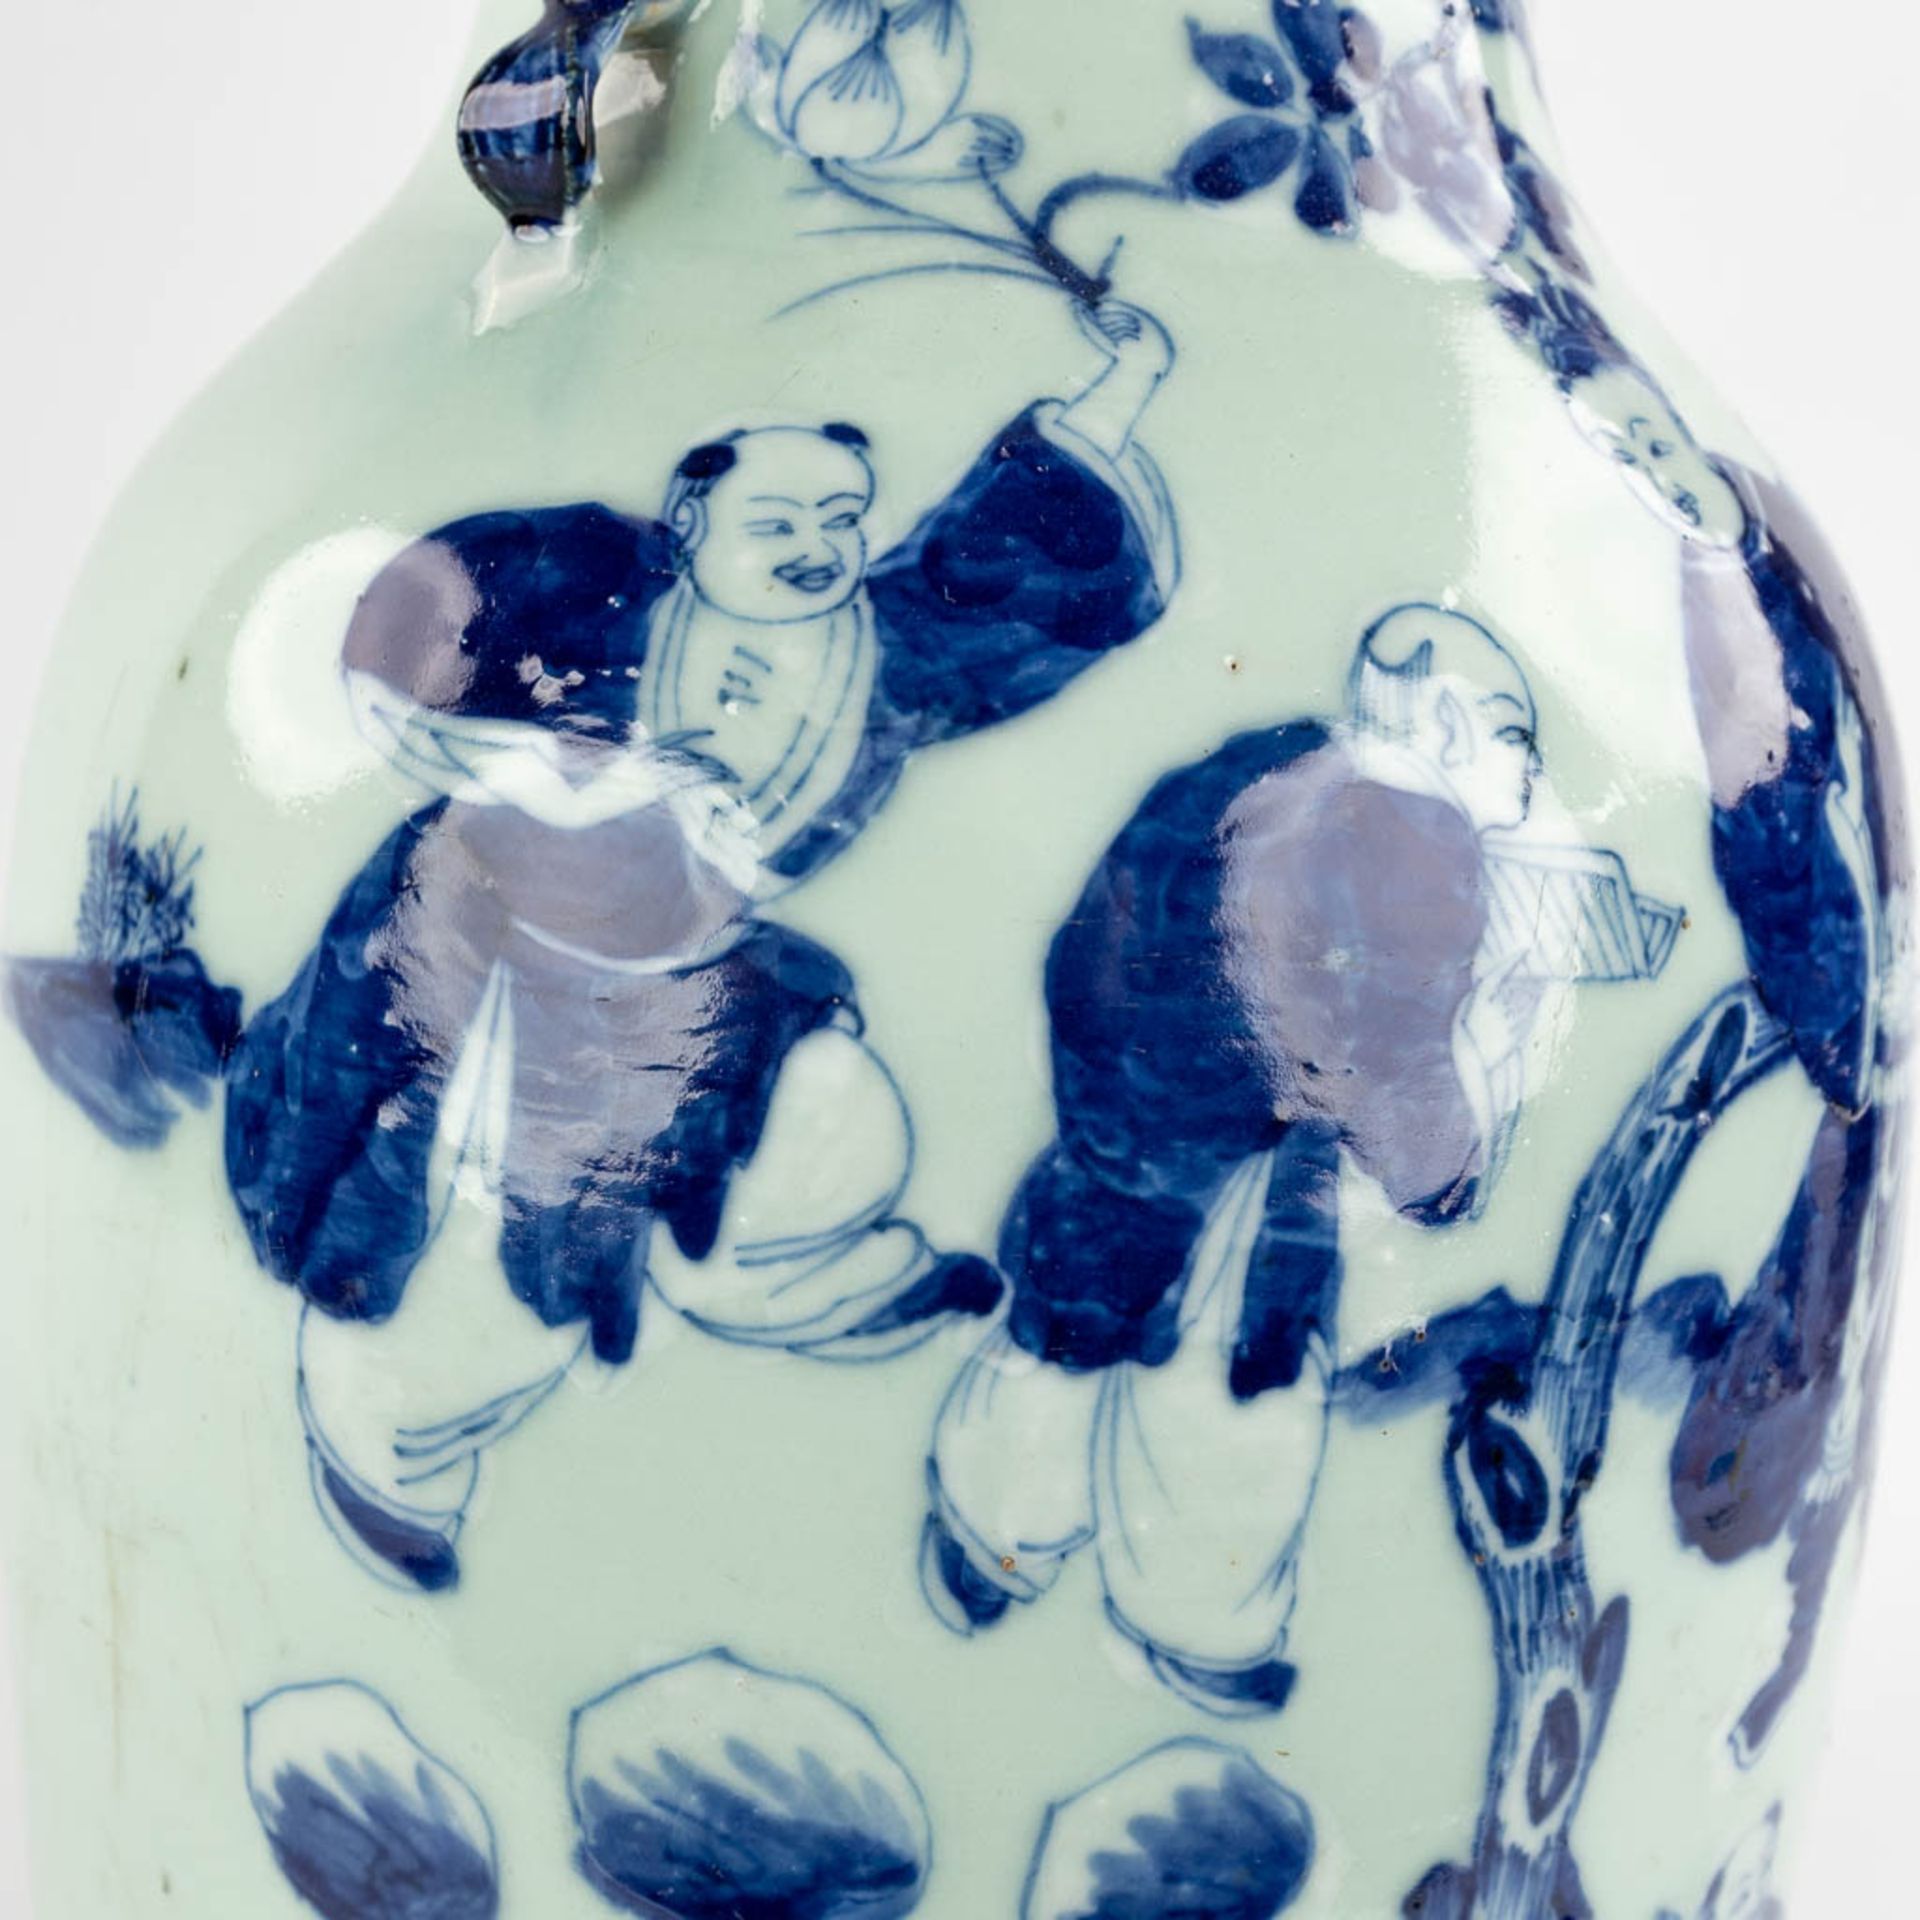 A Chinese celadon vase, blue-white, decorated with wise men. 19th/20th C. (H:59 x D:23 cm) - Image 12 of 16